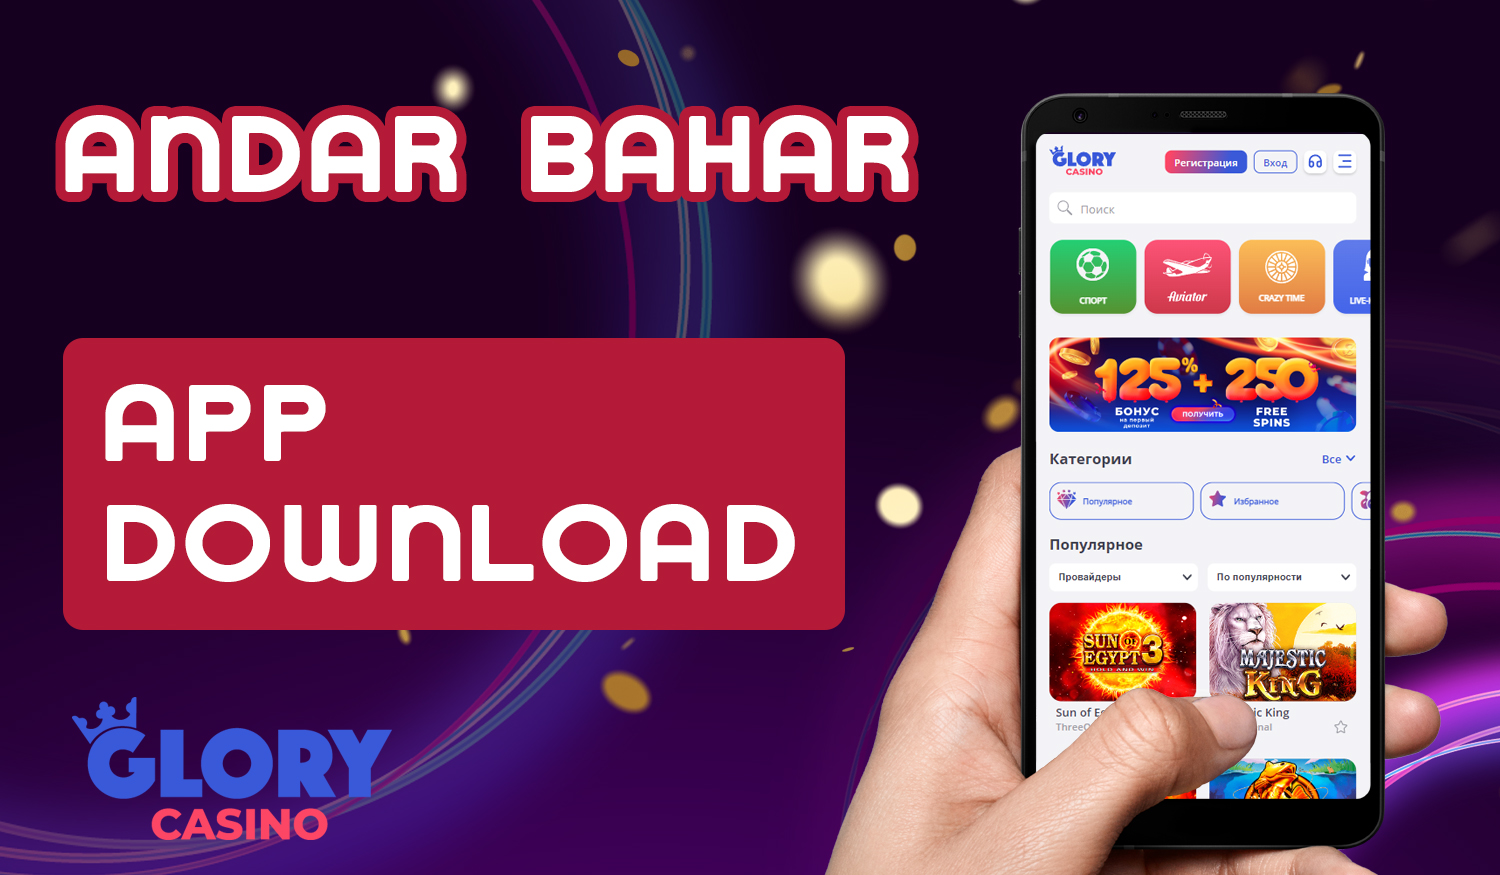 How Glory casino users from India can download mobile app to play Andar Bahar game